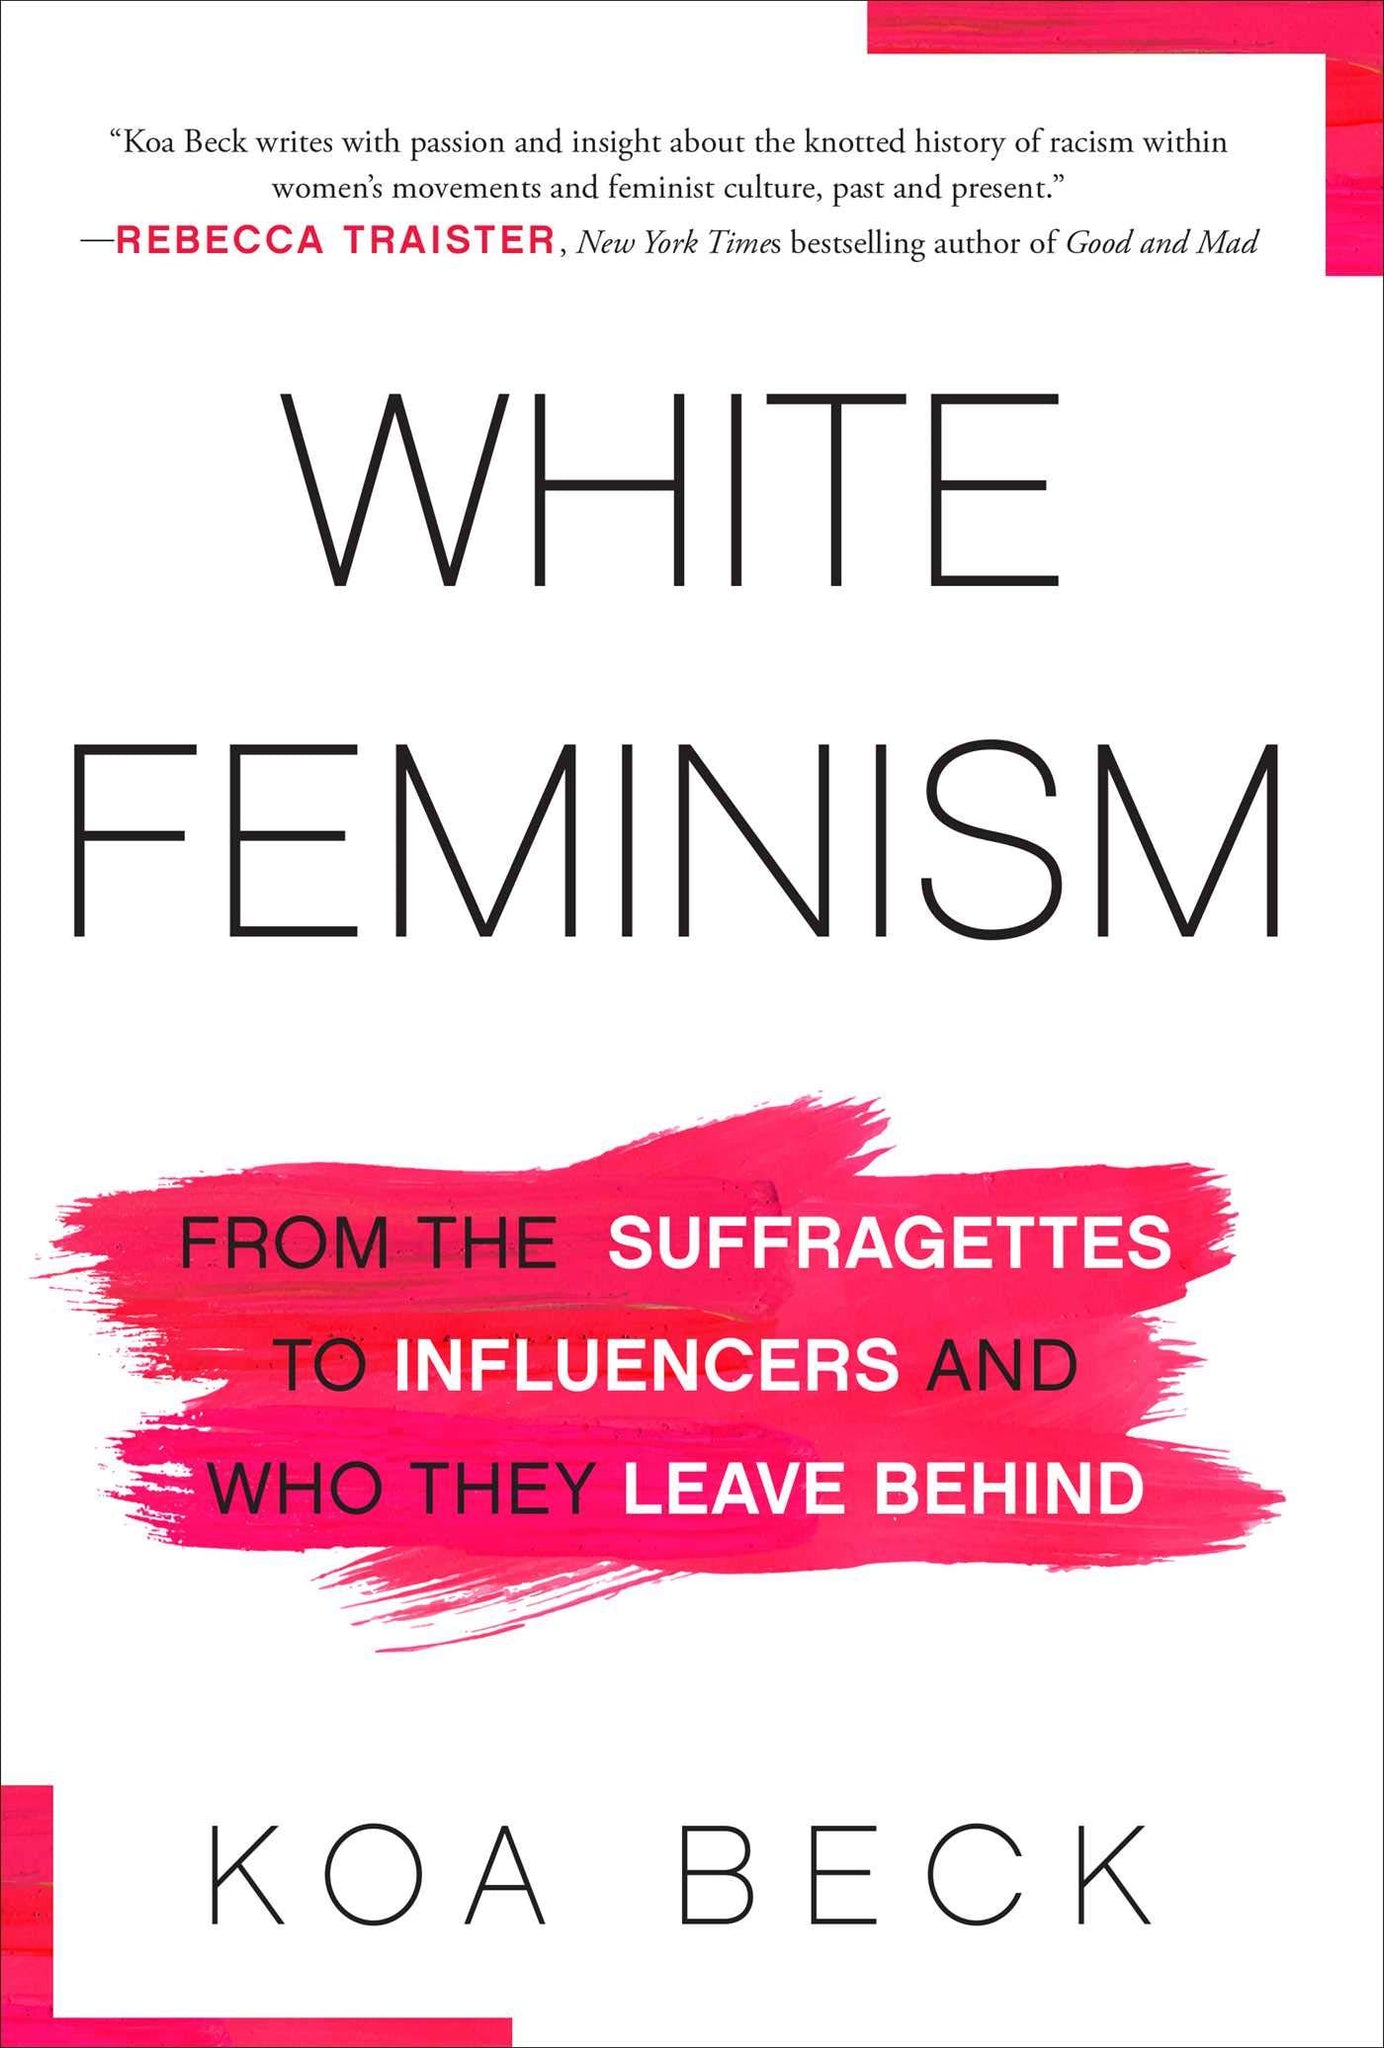 White Feminism: From the Suffragettes to Influencers and Who They Leave Behind (Paperback)